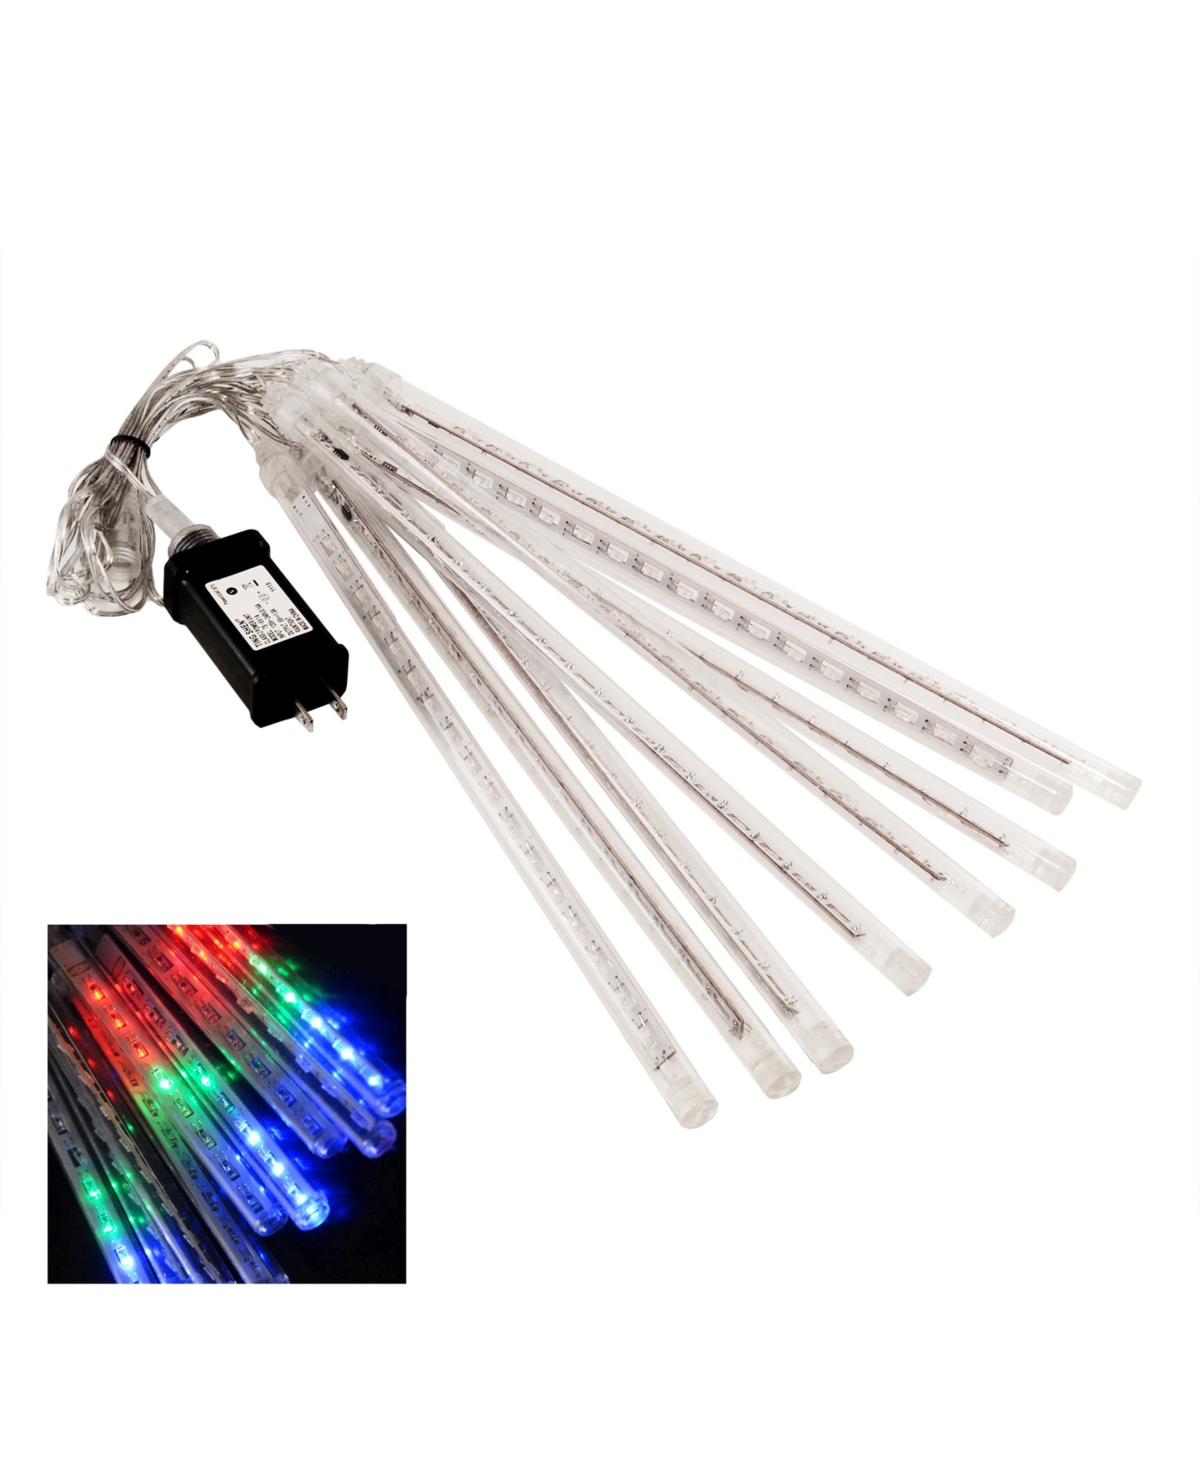 Jh Specialties Inc/lumabase Lumabase Electric Multicolor Meteor Rainfall Lights, 8 Light Tubes